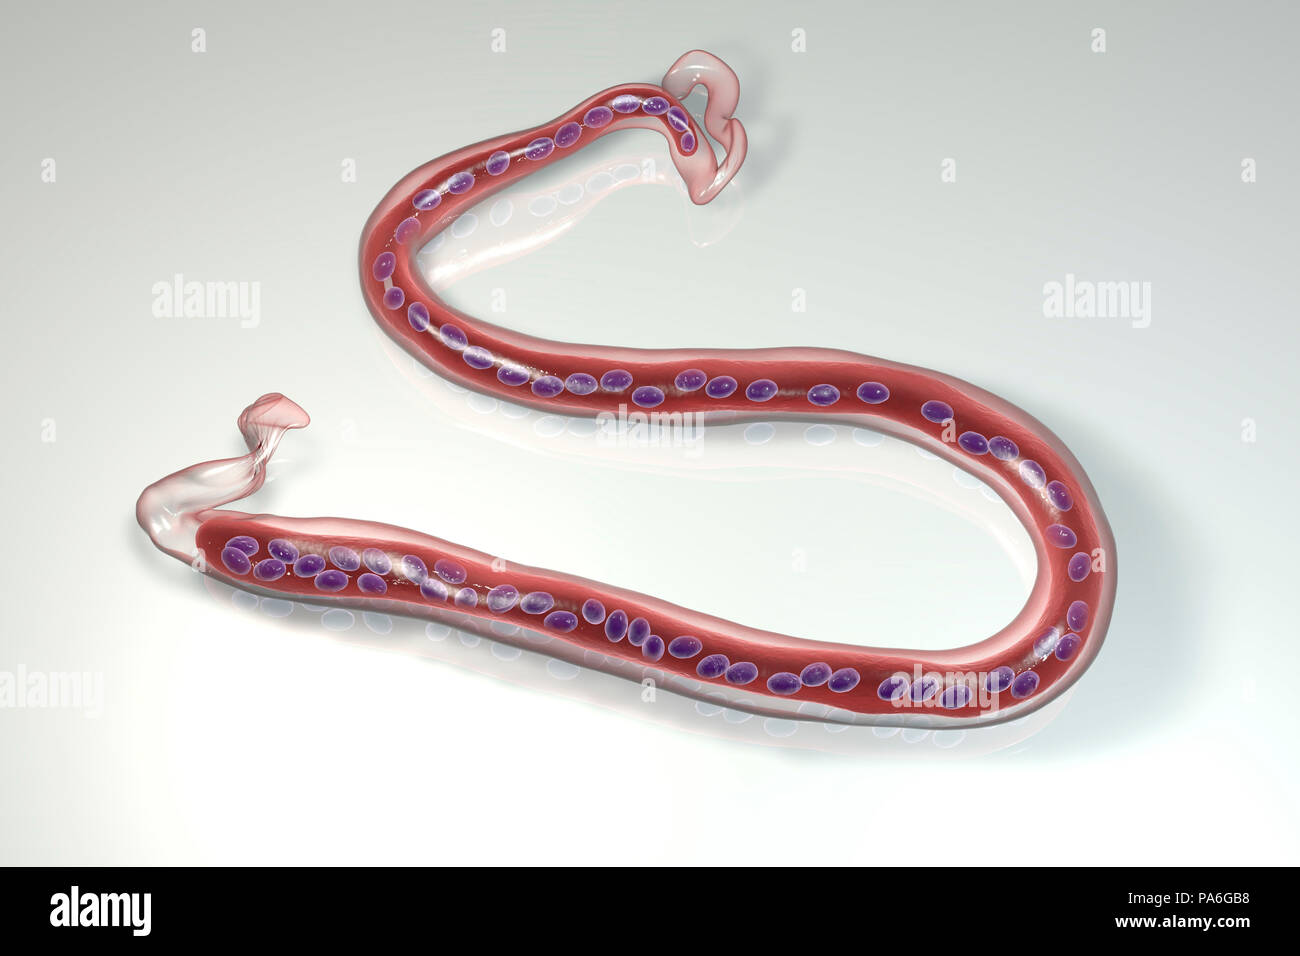 Loa Loa Worm Computer Illustration The Loa Loa Worm Is A Parasitic Nematode That Lives Under Human Skin Causing A Form Of Filariasis Called Loiasis The Worms Are Spread By Bloodsucking Chrysops